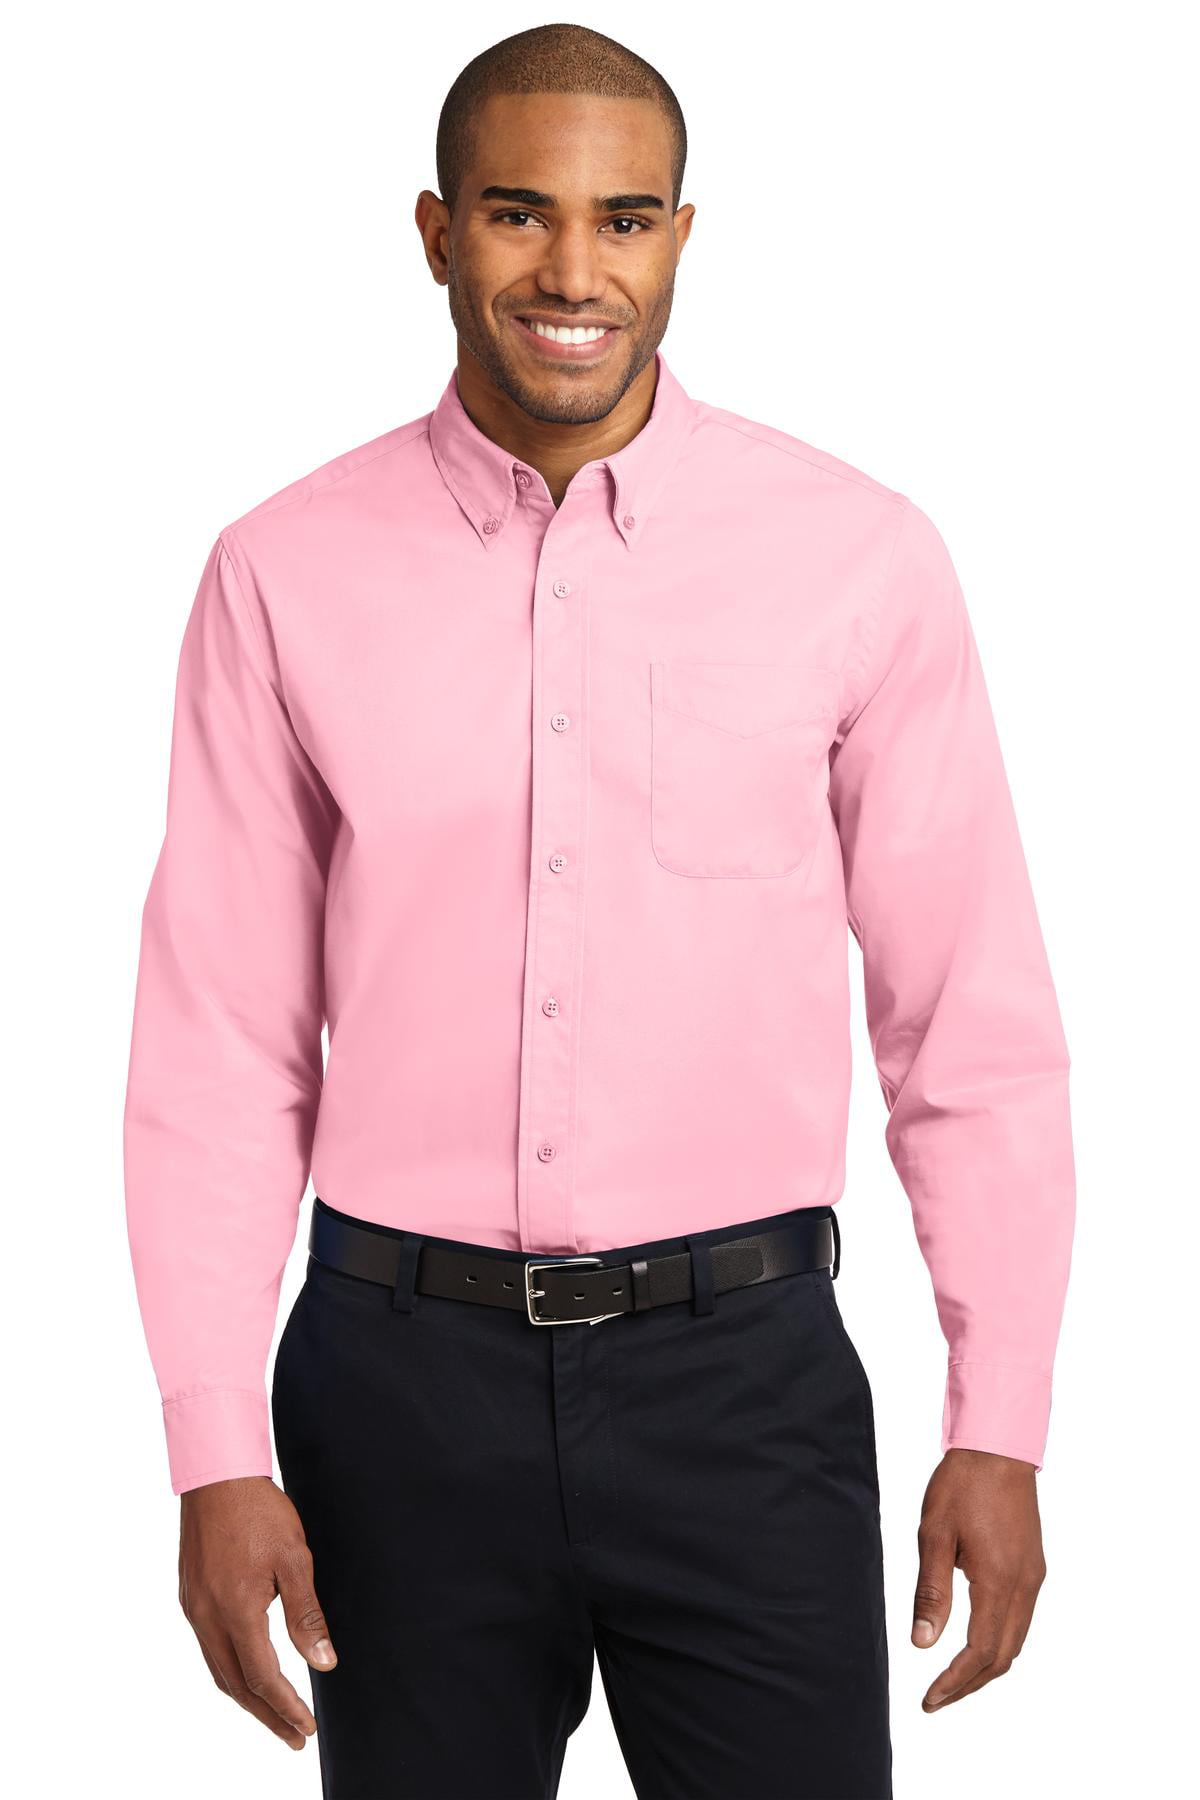 Port Authority Adult Male Men Plain Long Sleeves Shirt Light Pink Large Tall